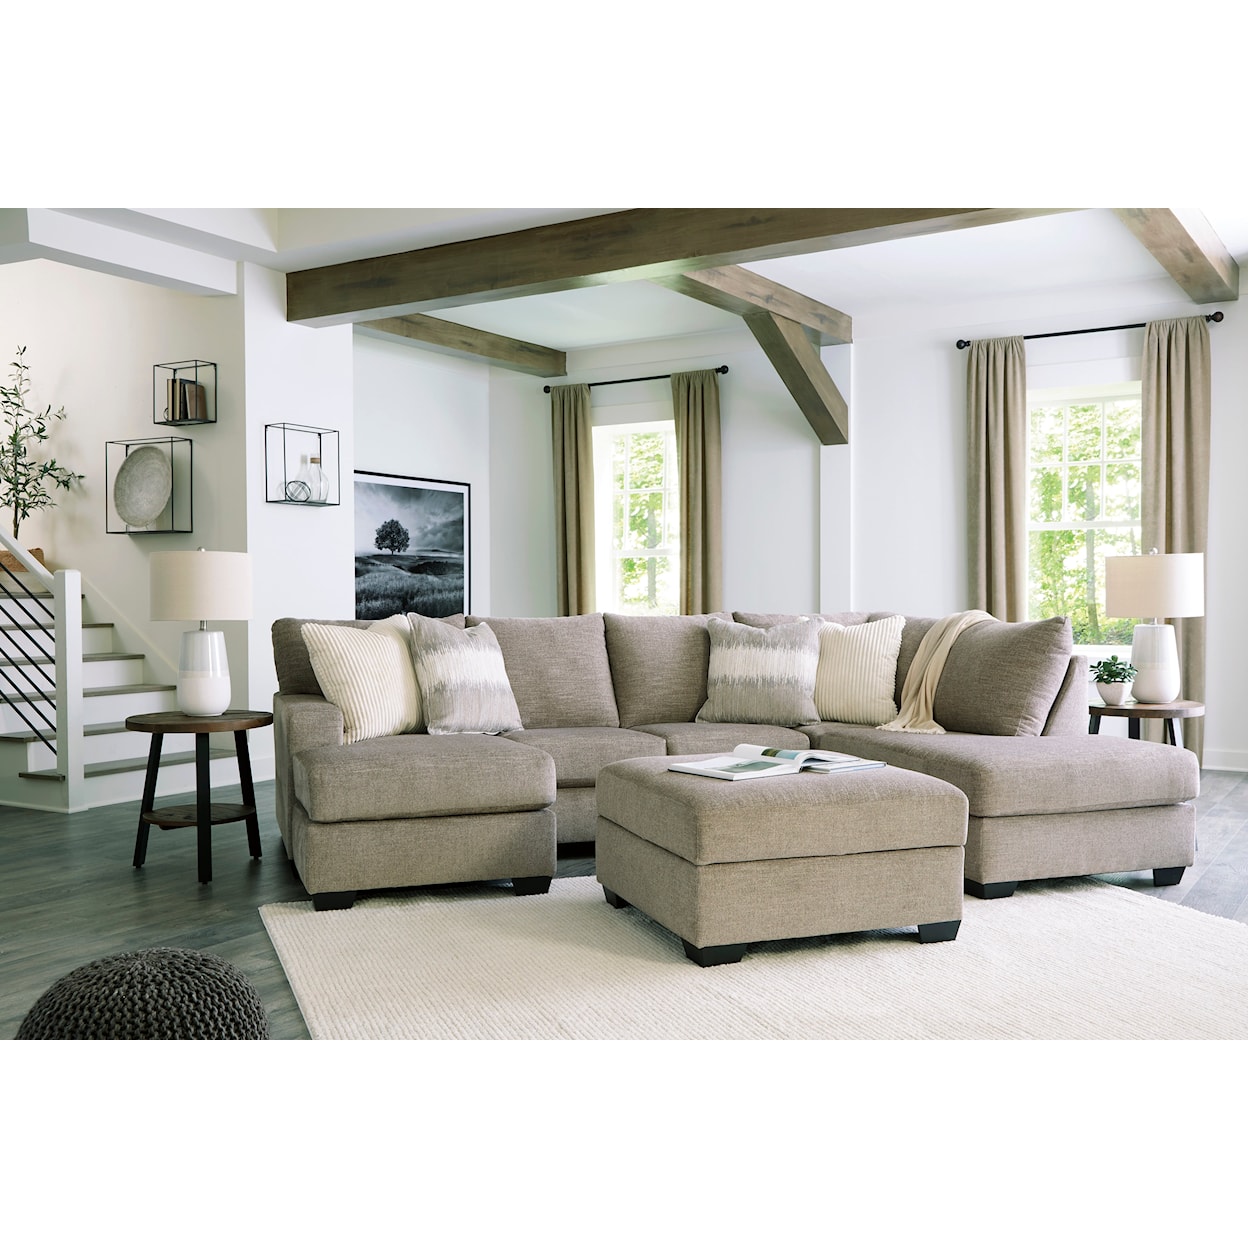 Signature Design by Ashley Furniture Creswell Living Room Set